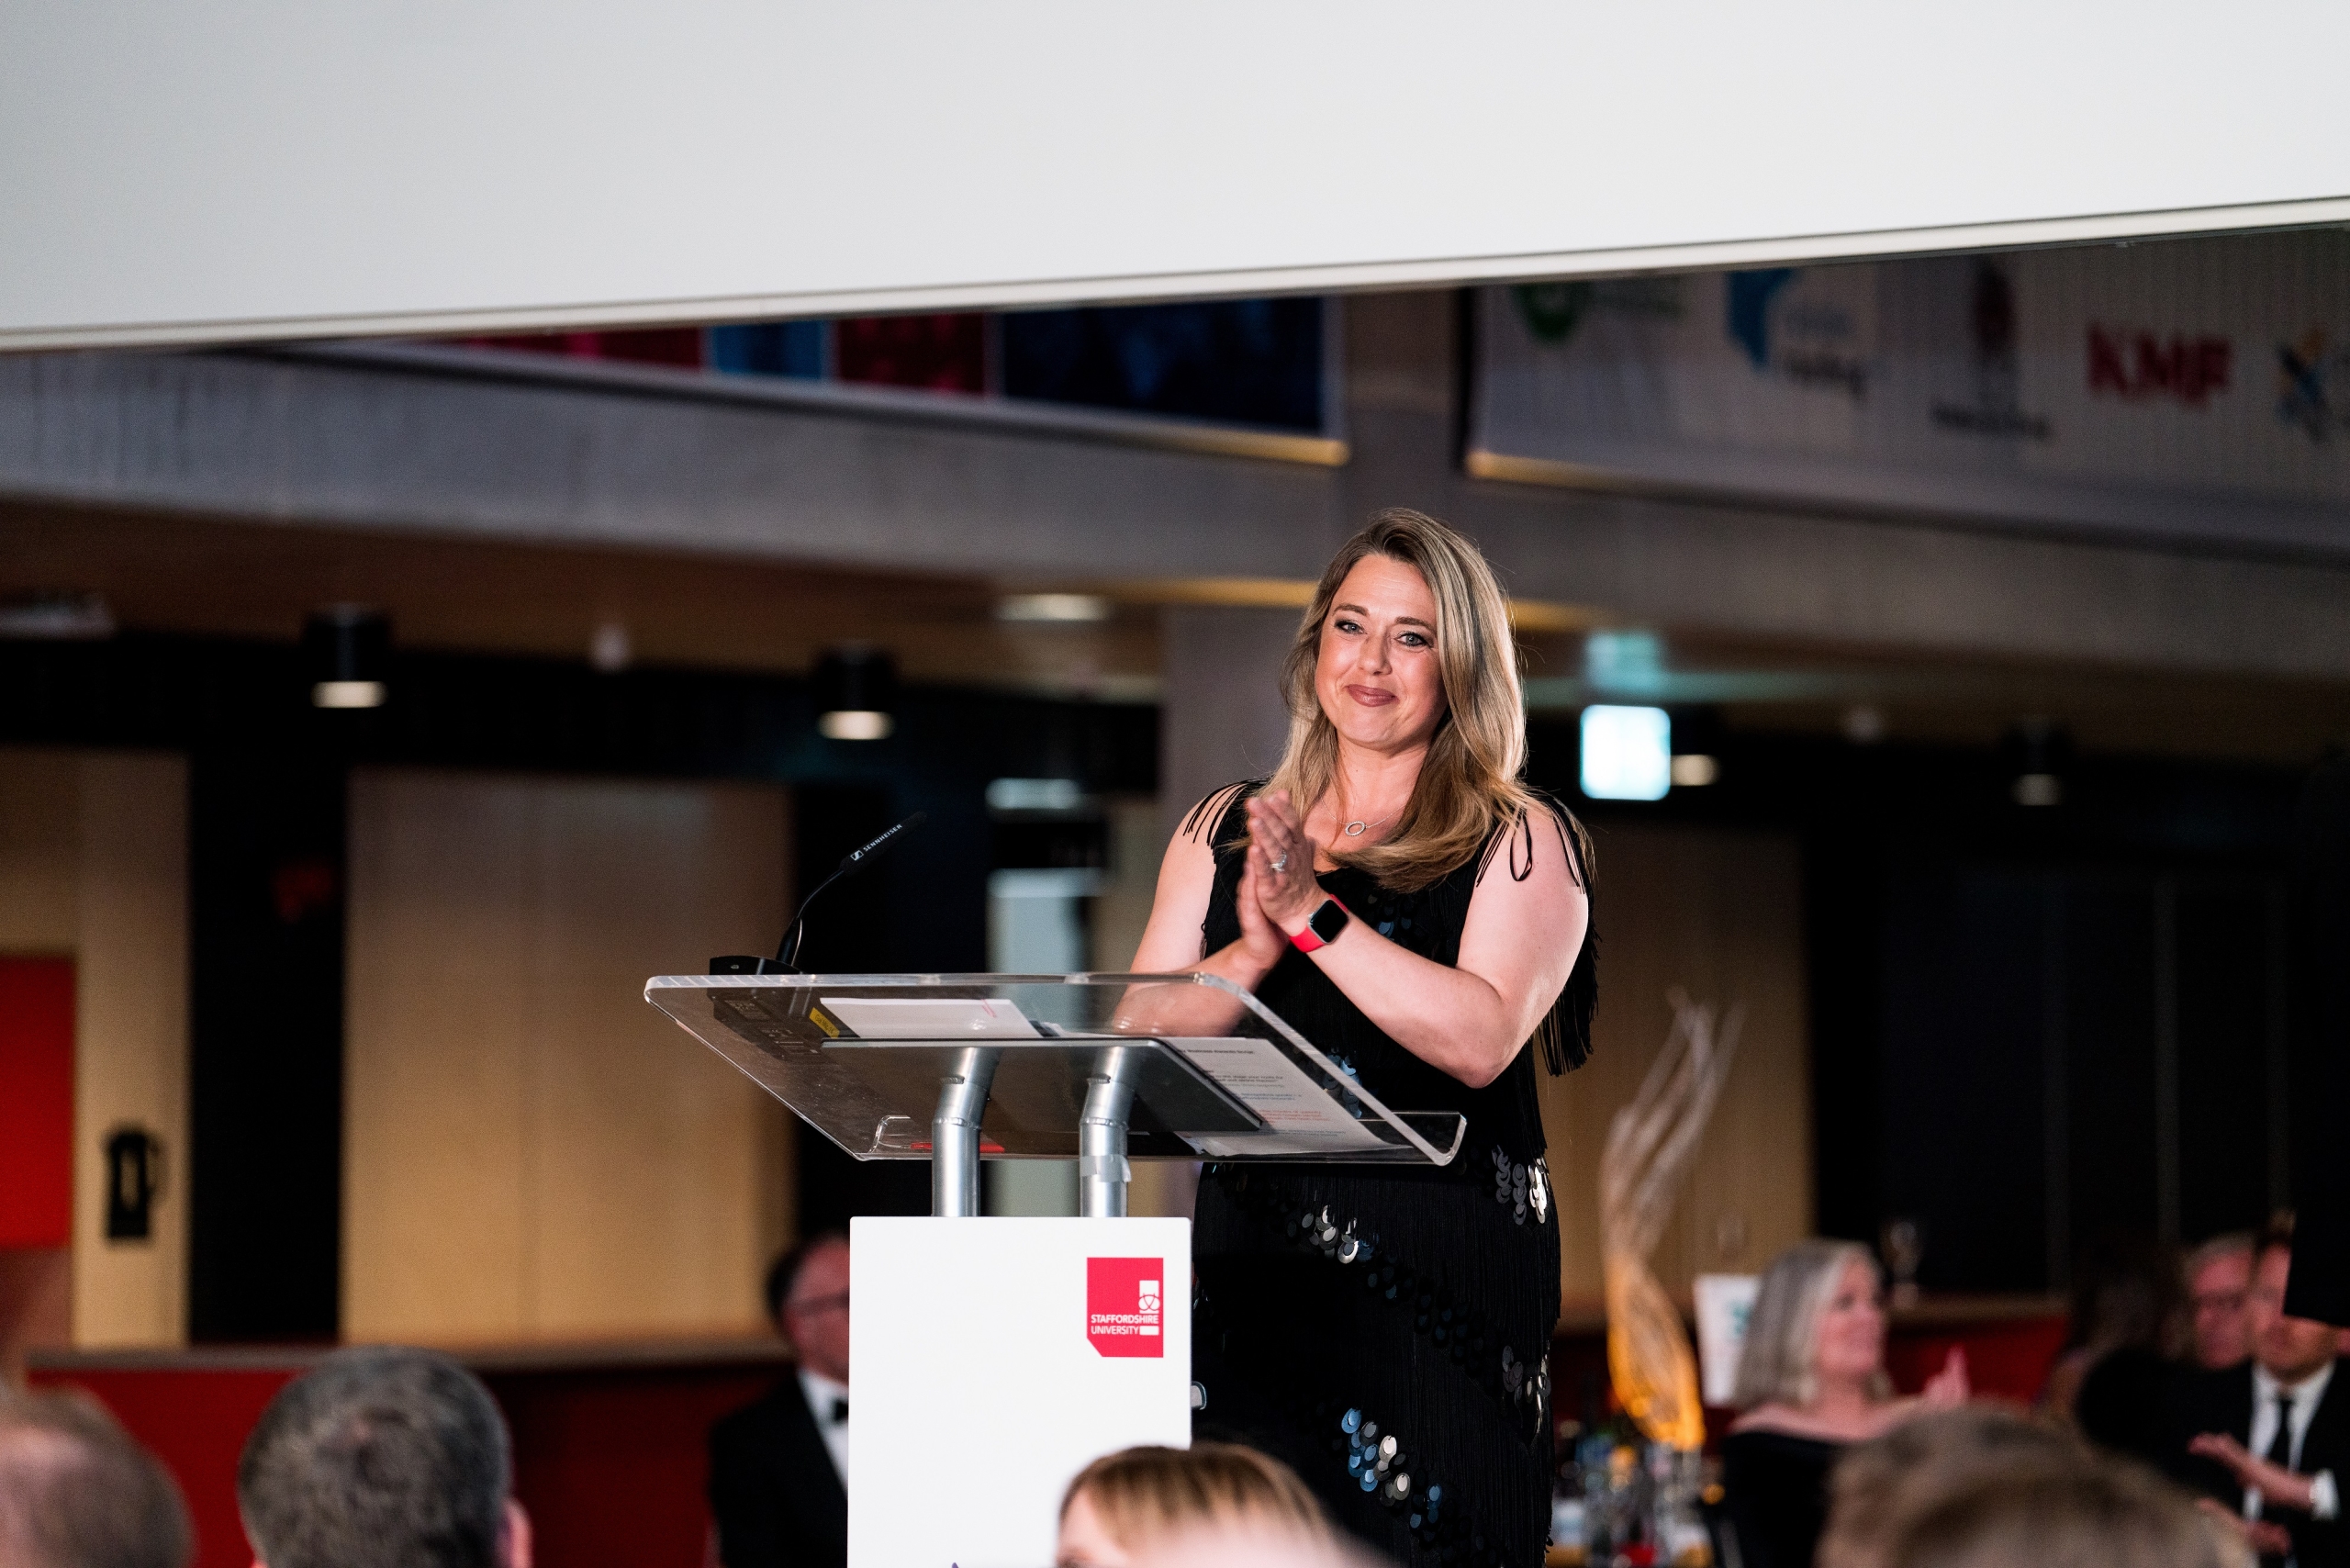 BBC TV presenter Janine Machin, who co-hosted the awards alongside Martin Tideswell, Director of Communities and Commercial Engagement at Staffordshire University.